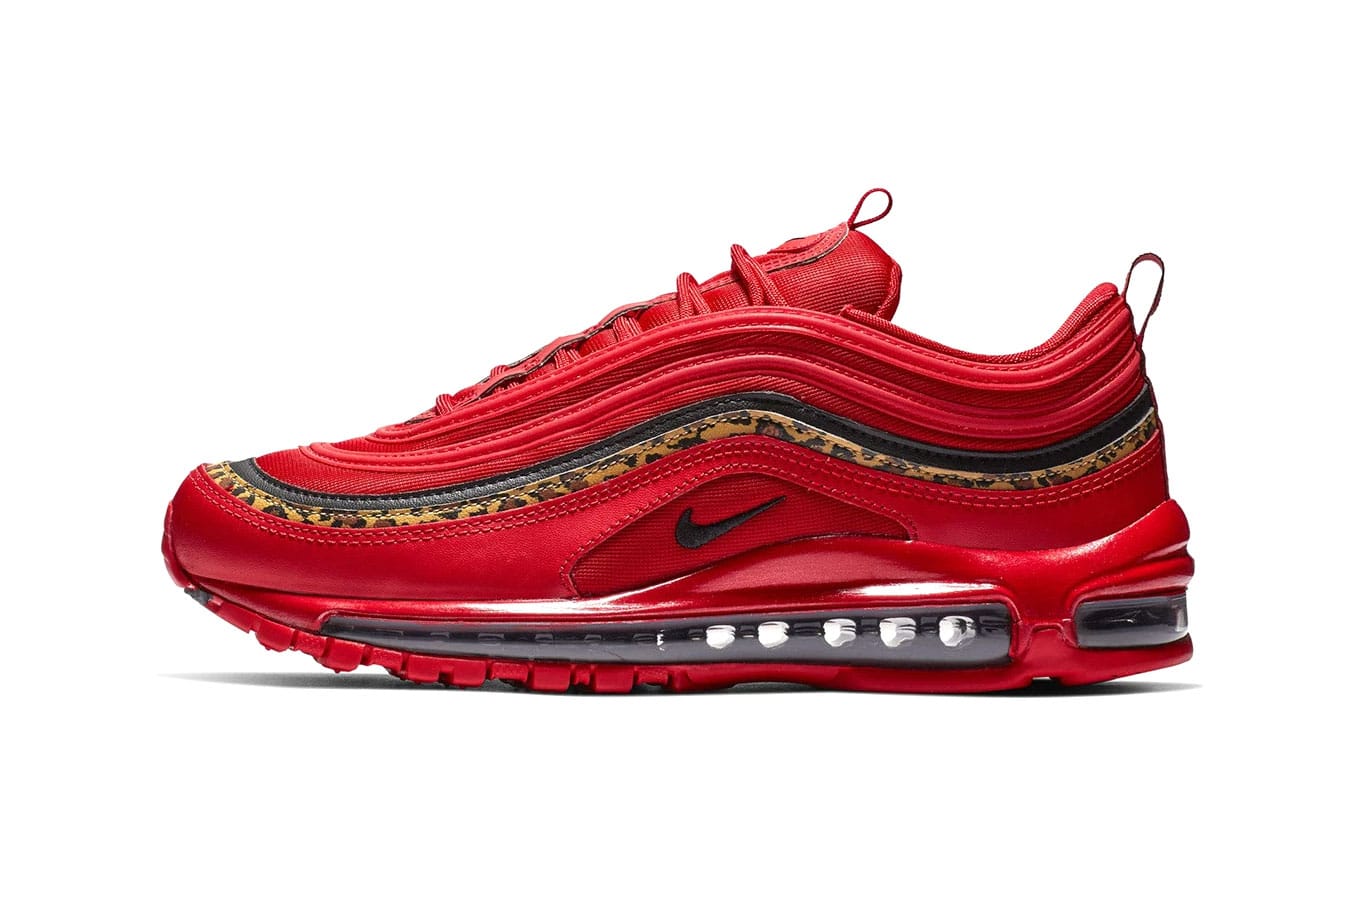 Nike Air Max 97 Red Leather & Leopard Print | HYPEBEAST